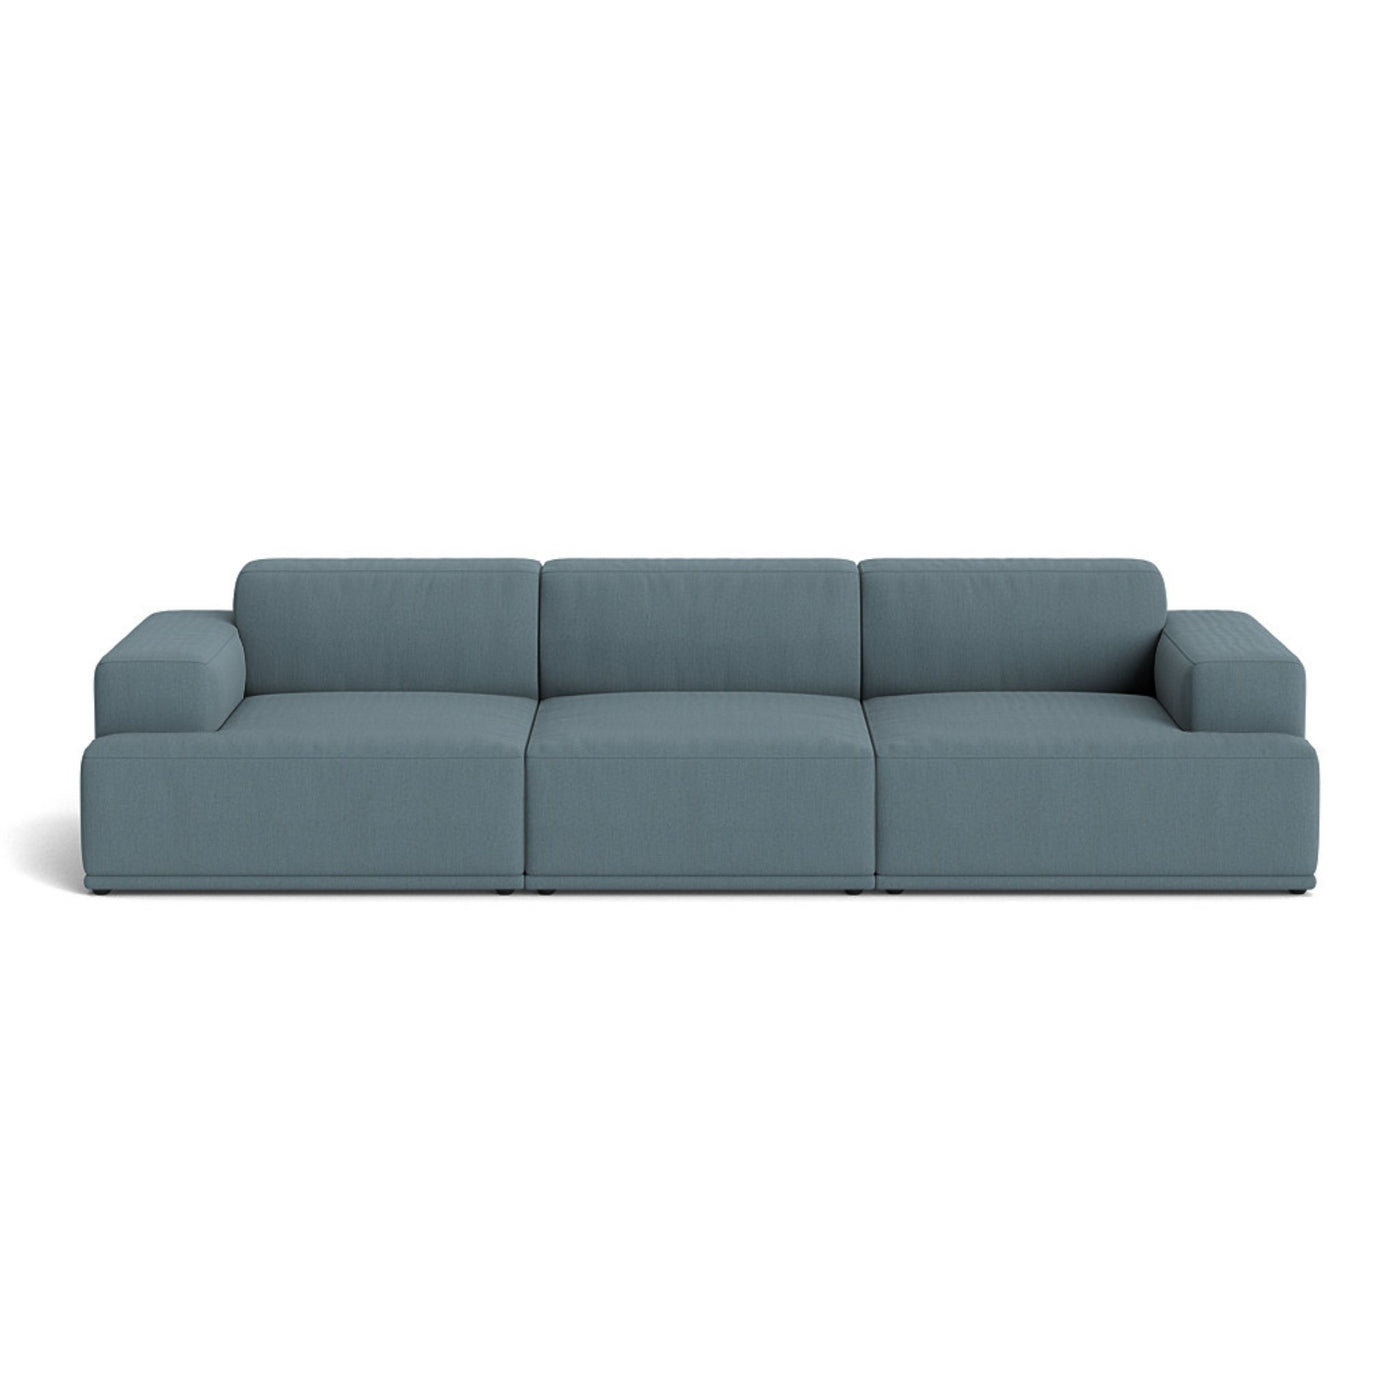 Muuto Connect Soft Modular 3 Seater Sofa, configuration 1. Made-to-order from someday designs. #colour_re-wool-768